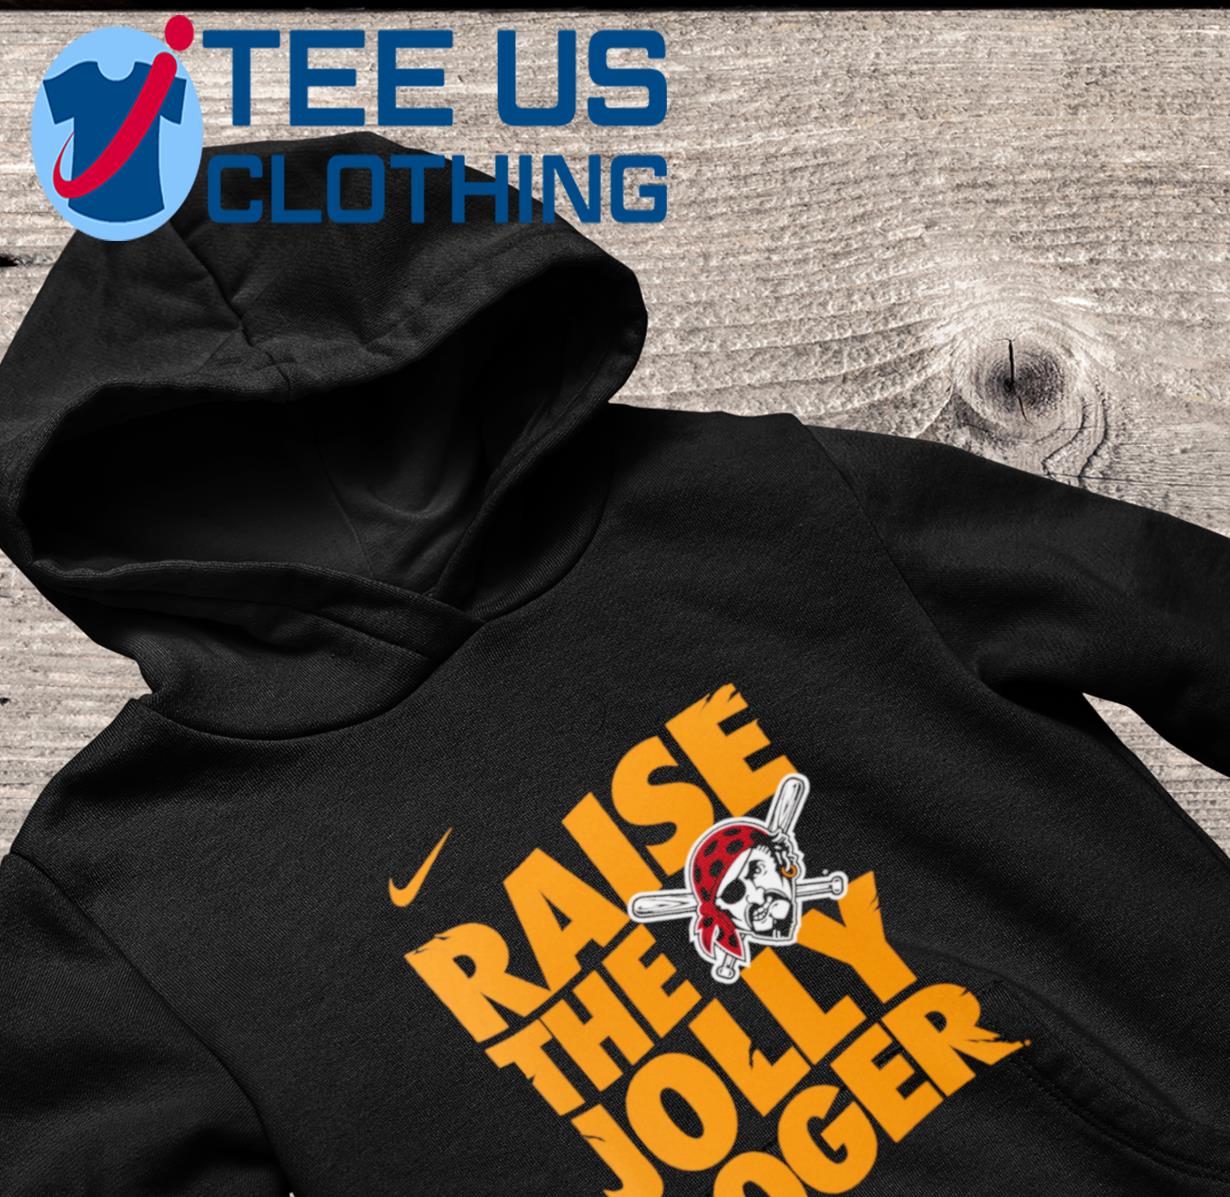 Pittsburgh Pirates raise the jolly roger shirt, hoodie, sweater